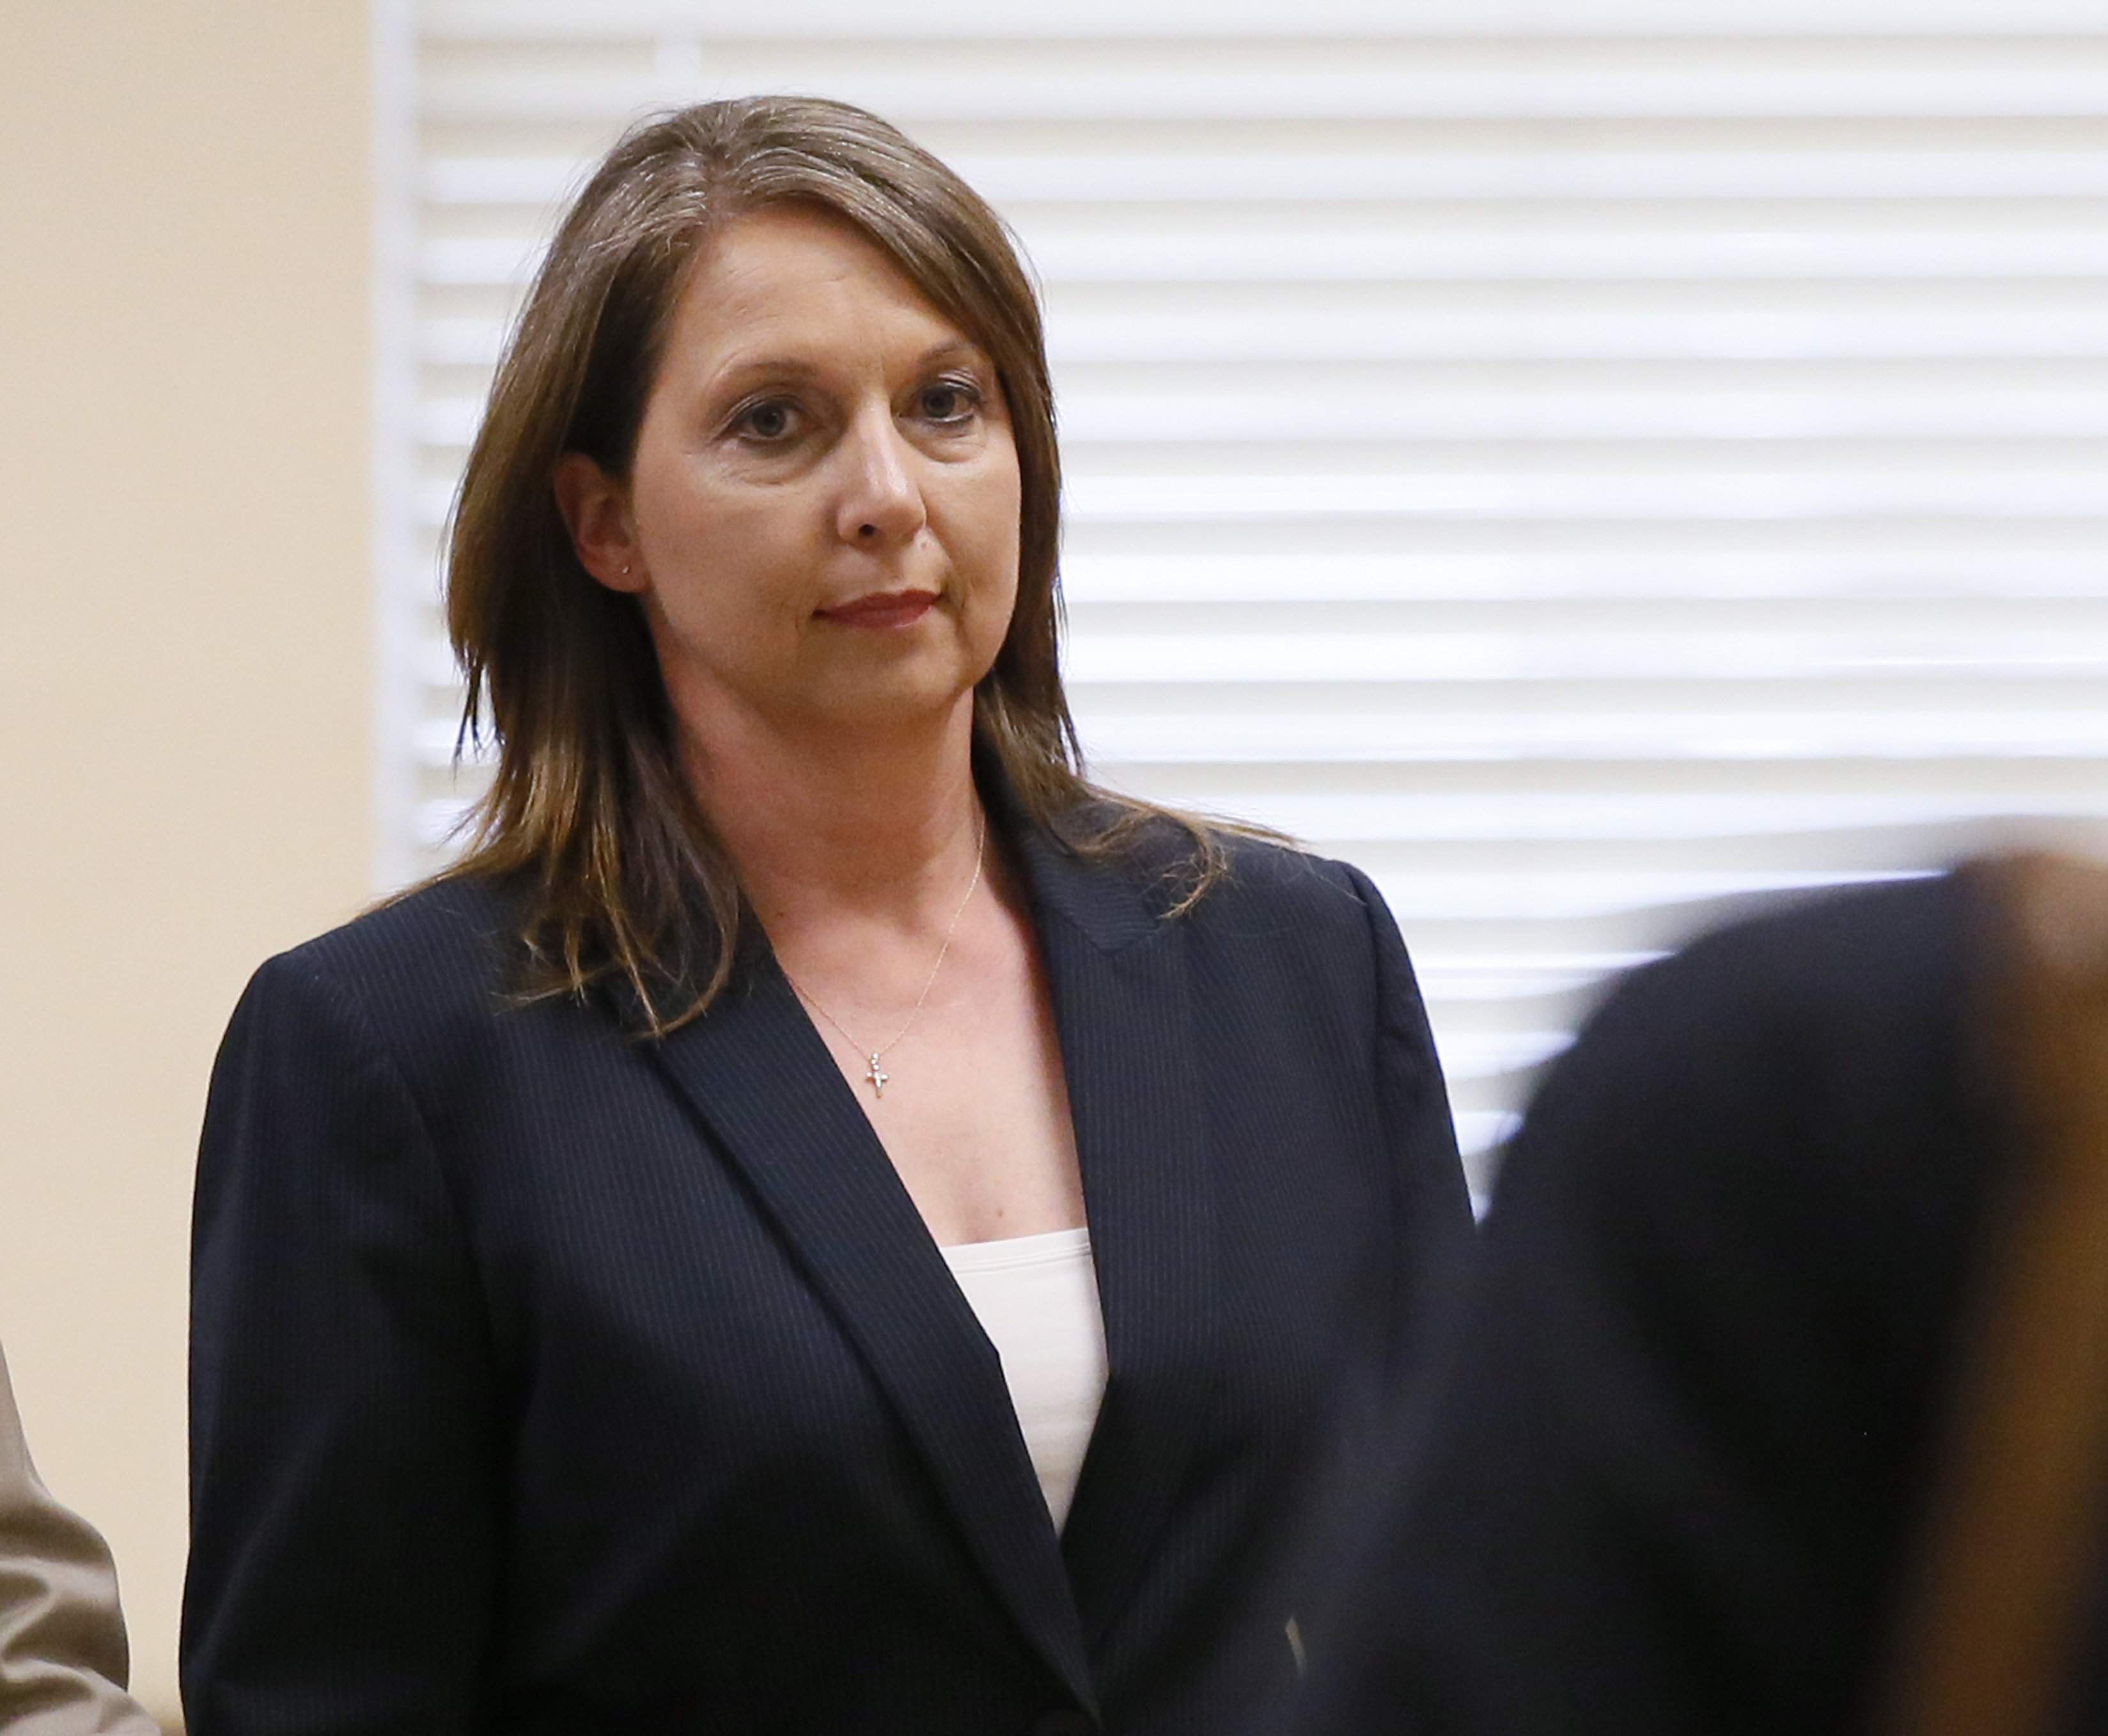 Betty Shelby leaves the courtroom following testimony in her trial in Tulsa, Okla. on May 12, 2017. (Sue Ogrocki&mdash;AP)